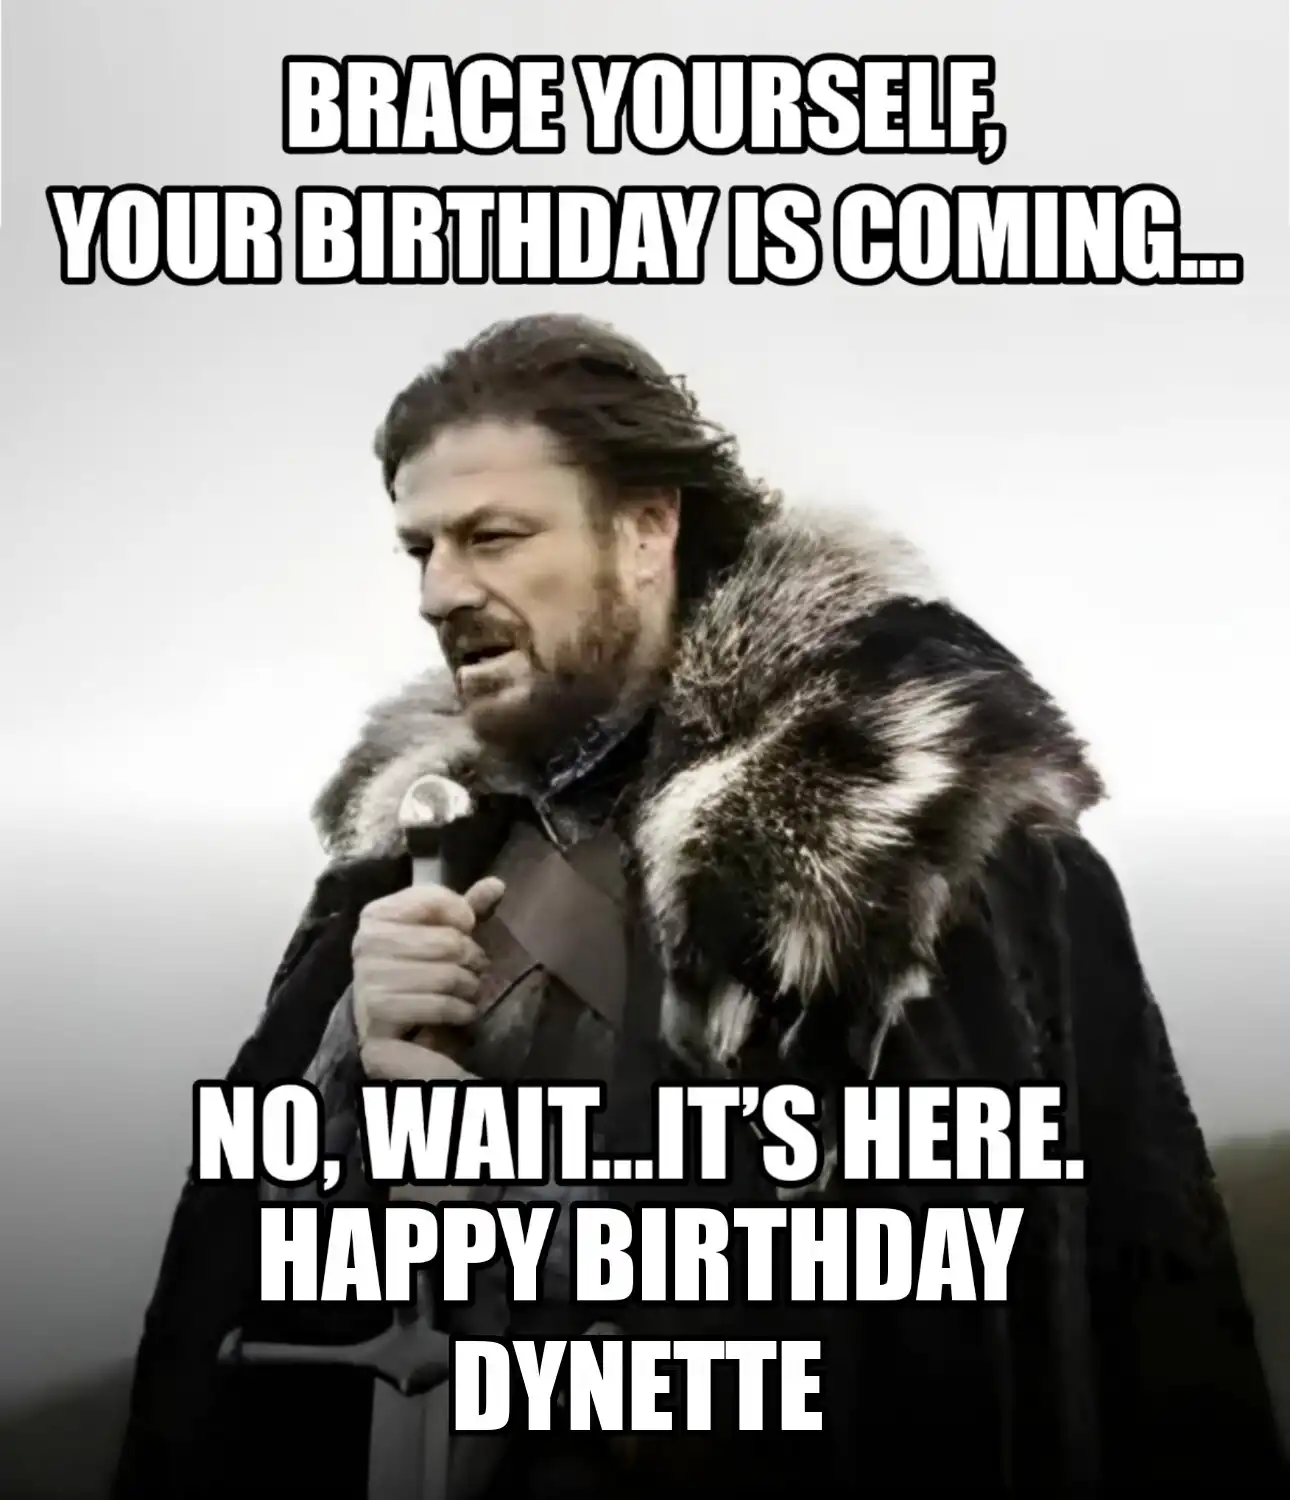 Happy Birthday Dynette Brace Yourself Your Birthday Is Coming Meme